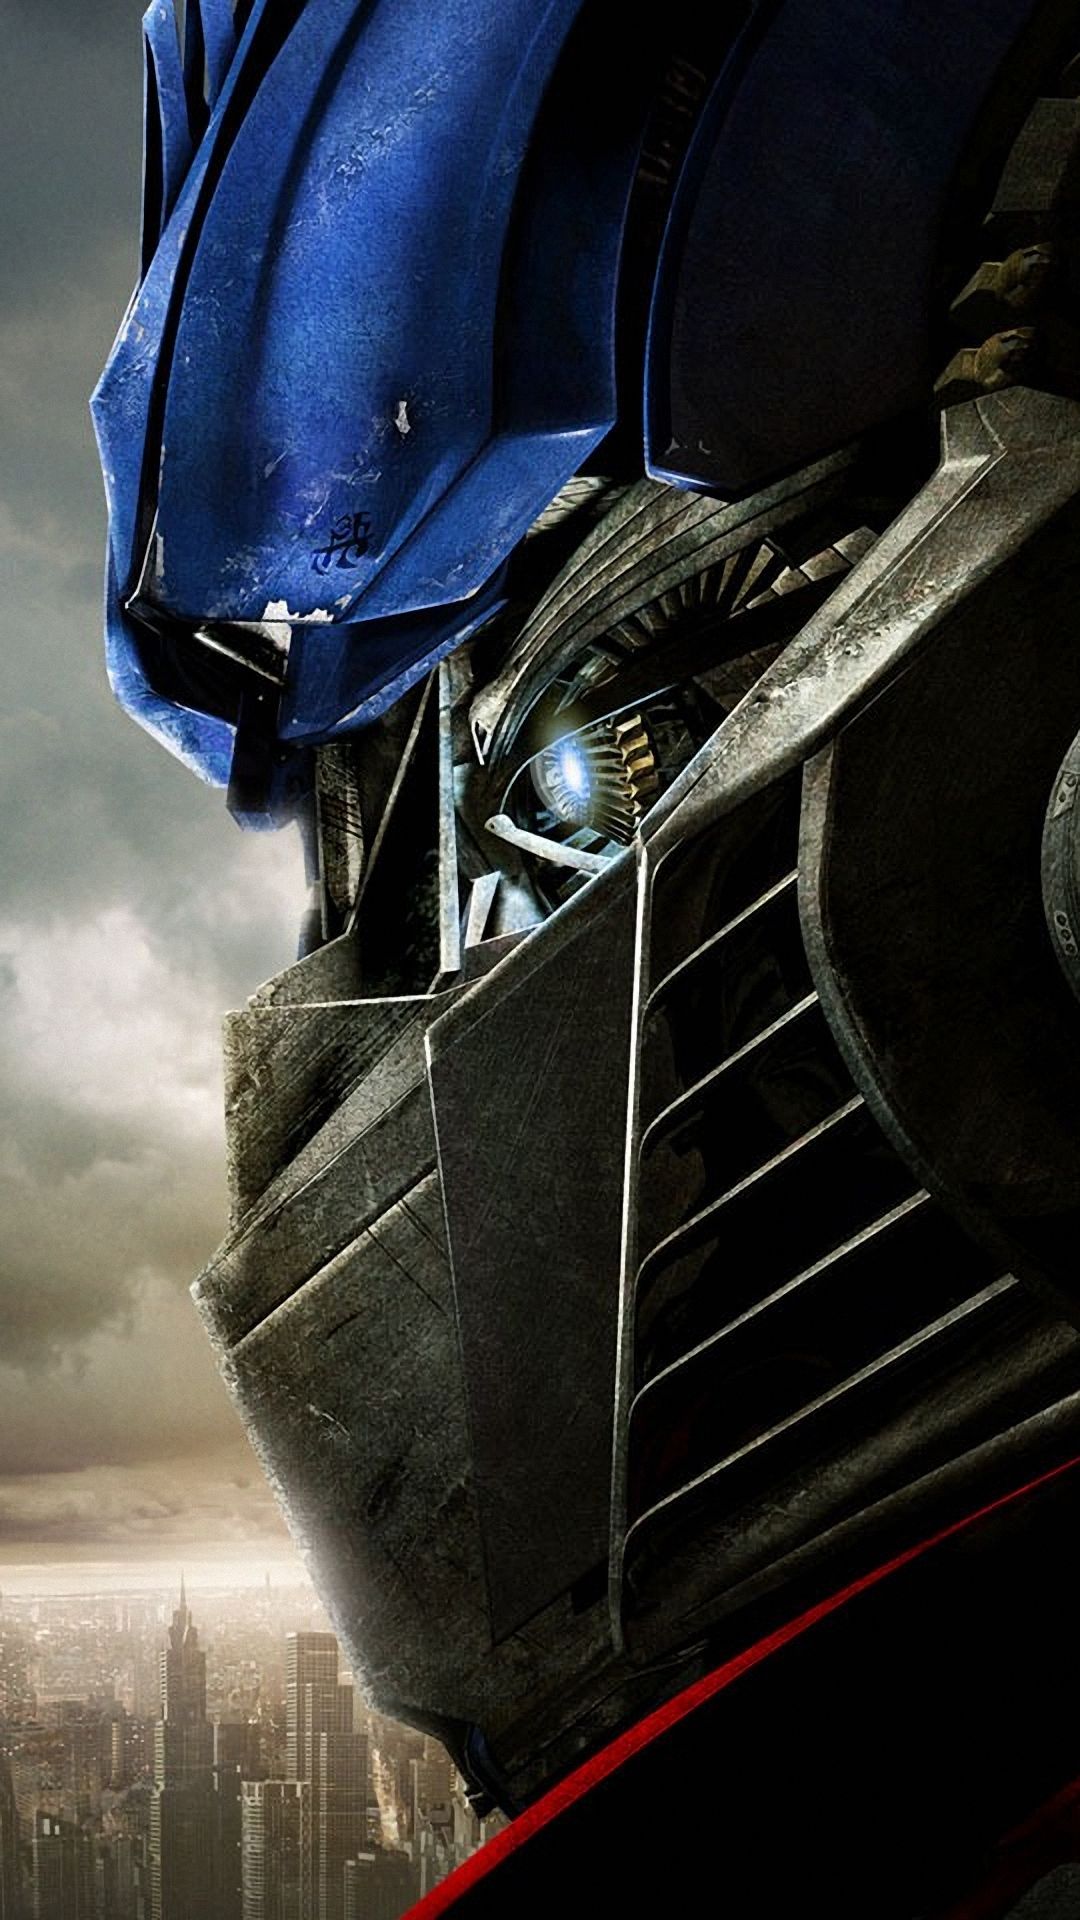 Transformers HD Wallpaper For Mobile Gallery